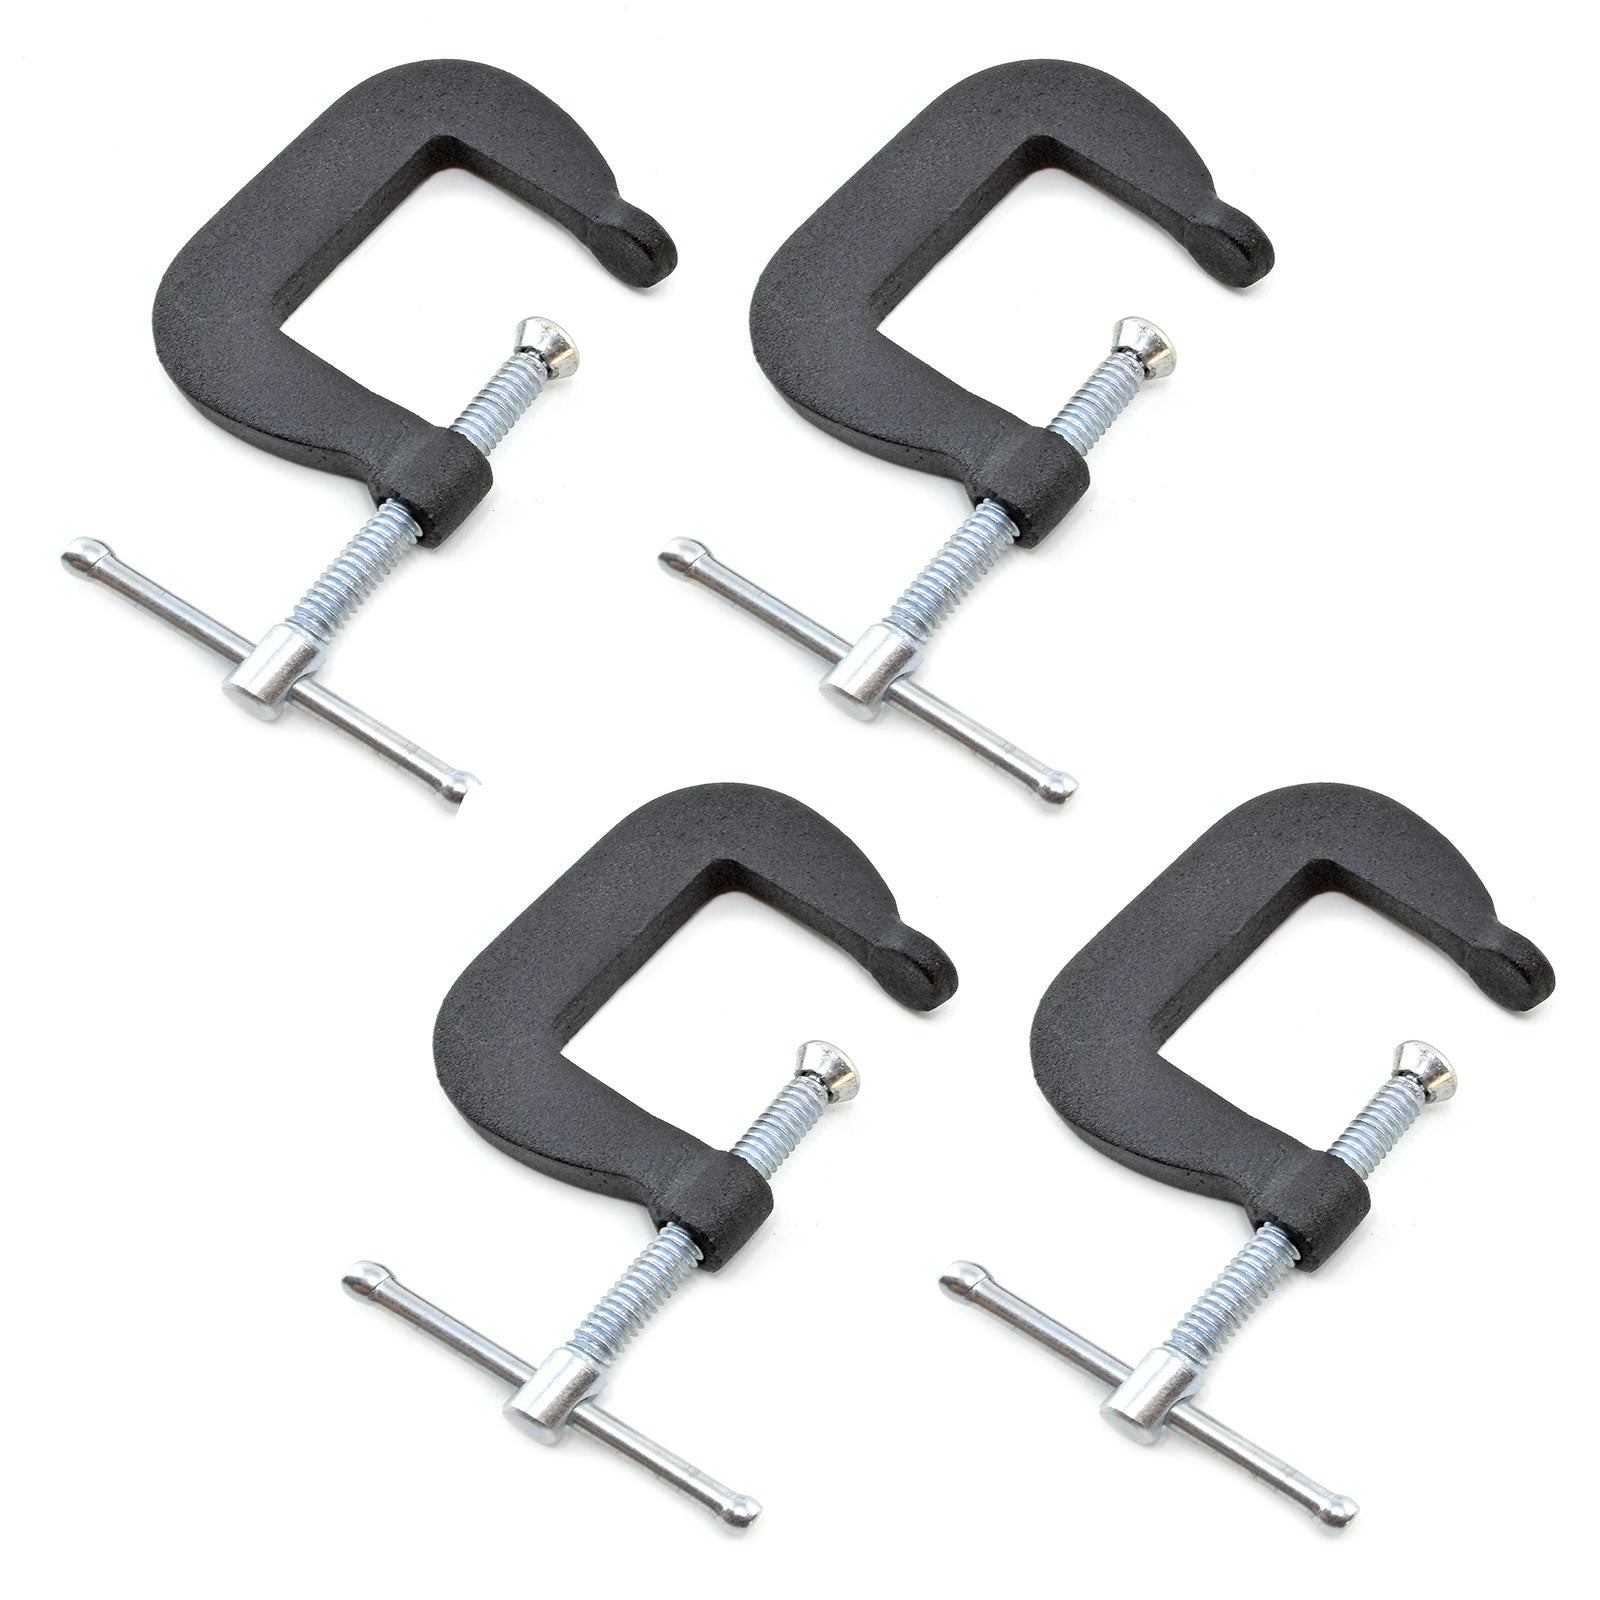 1.25" x 1.25" Miniature Forged Steel C-clamp, Set of 4